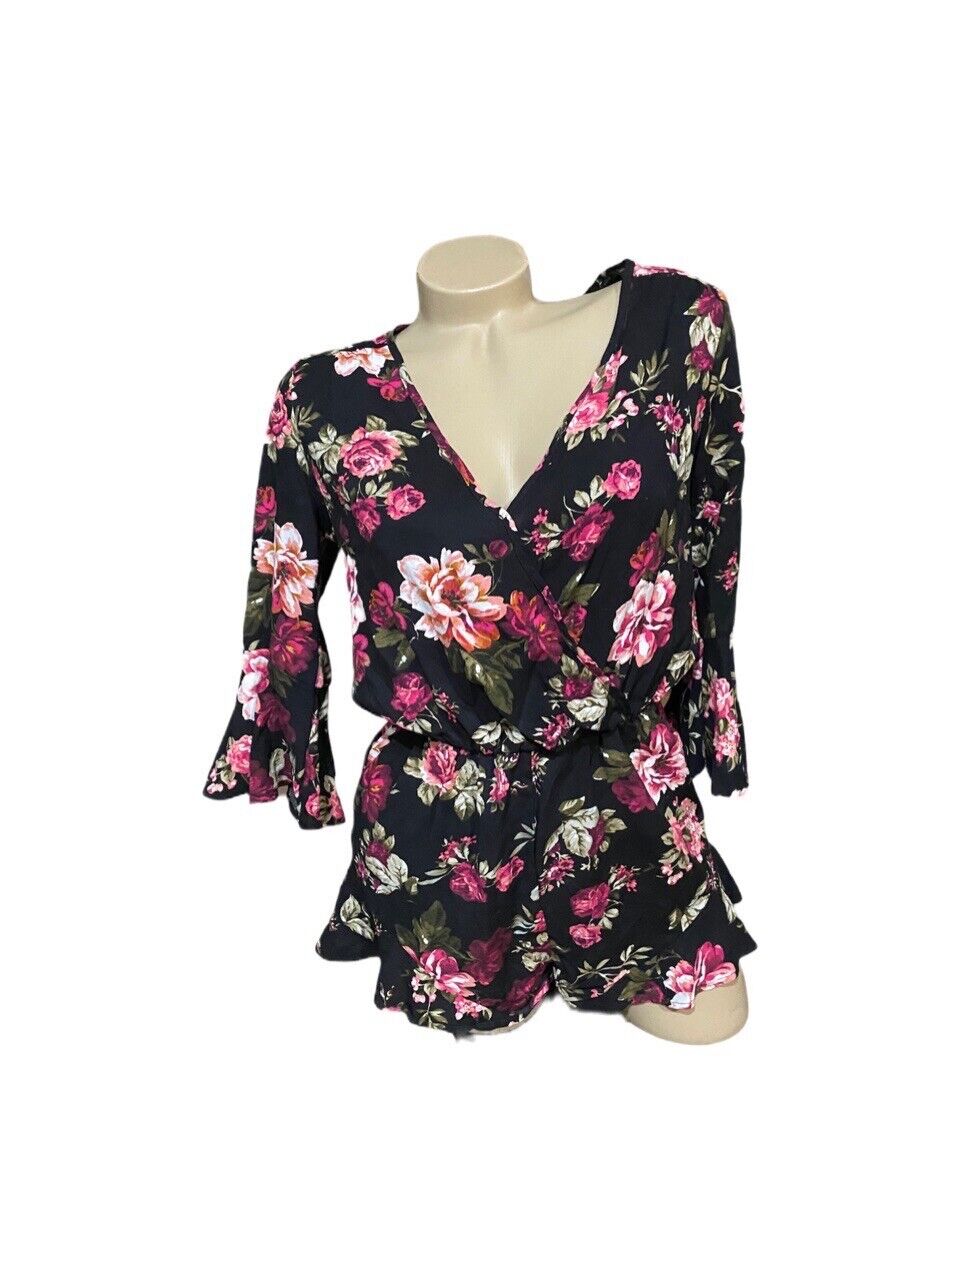 Black Floral Ruffle Romper Small Ambiance - image 1